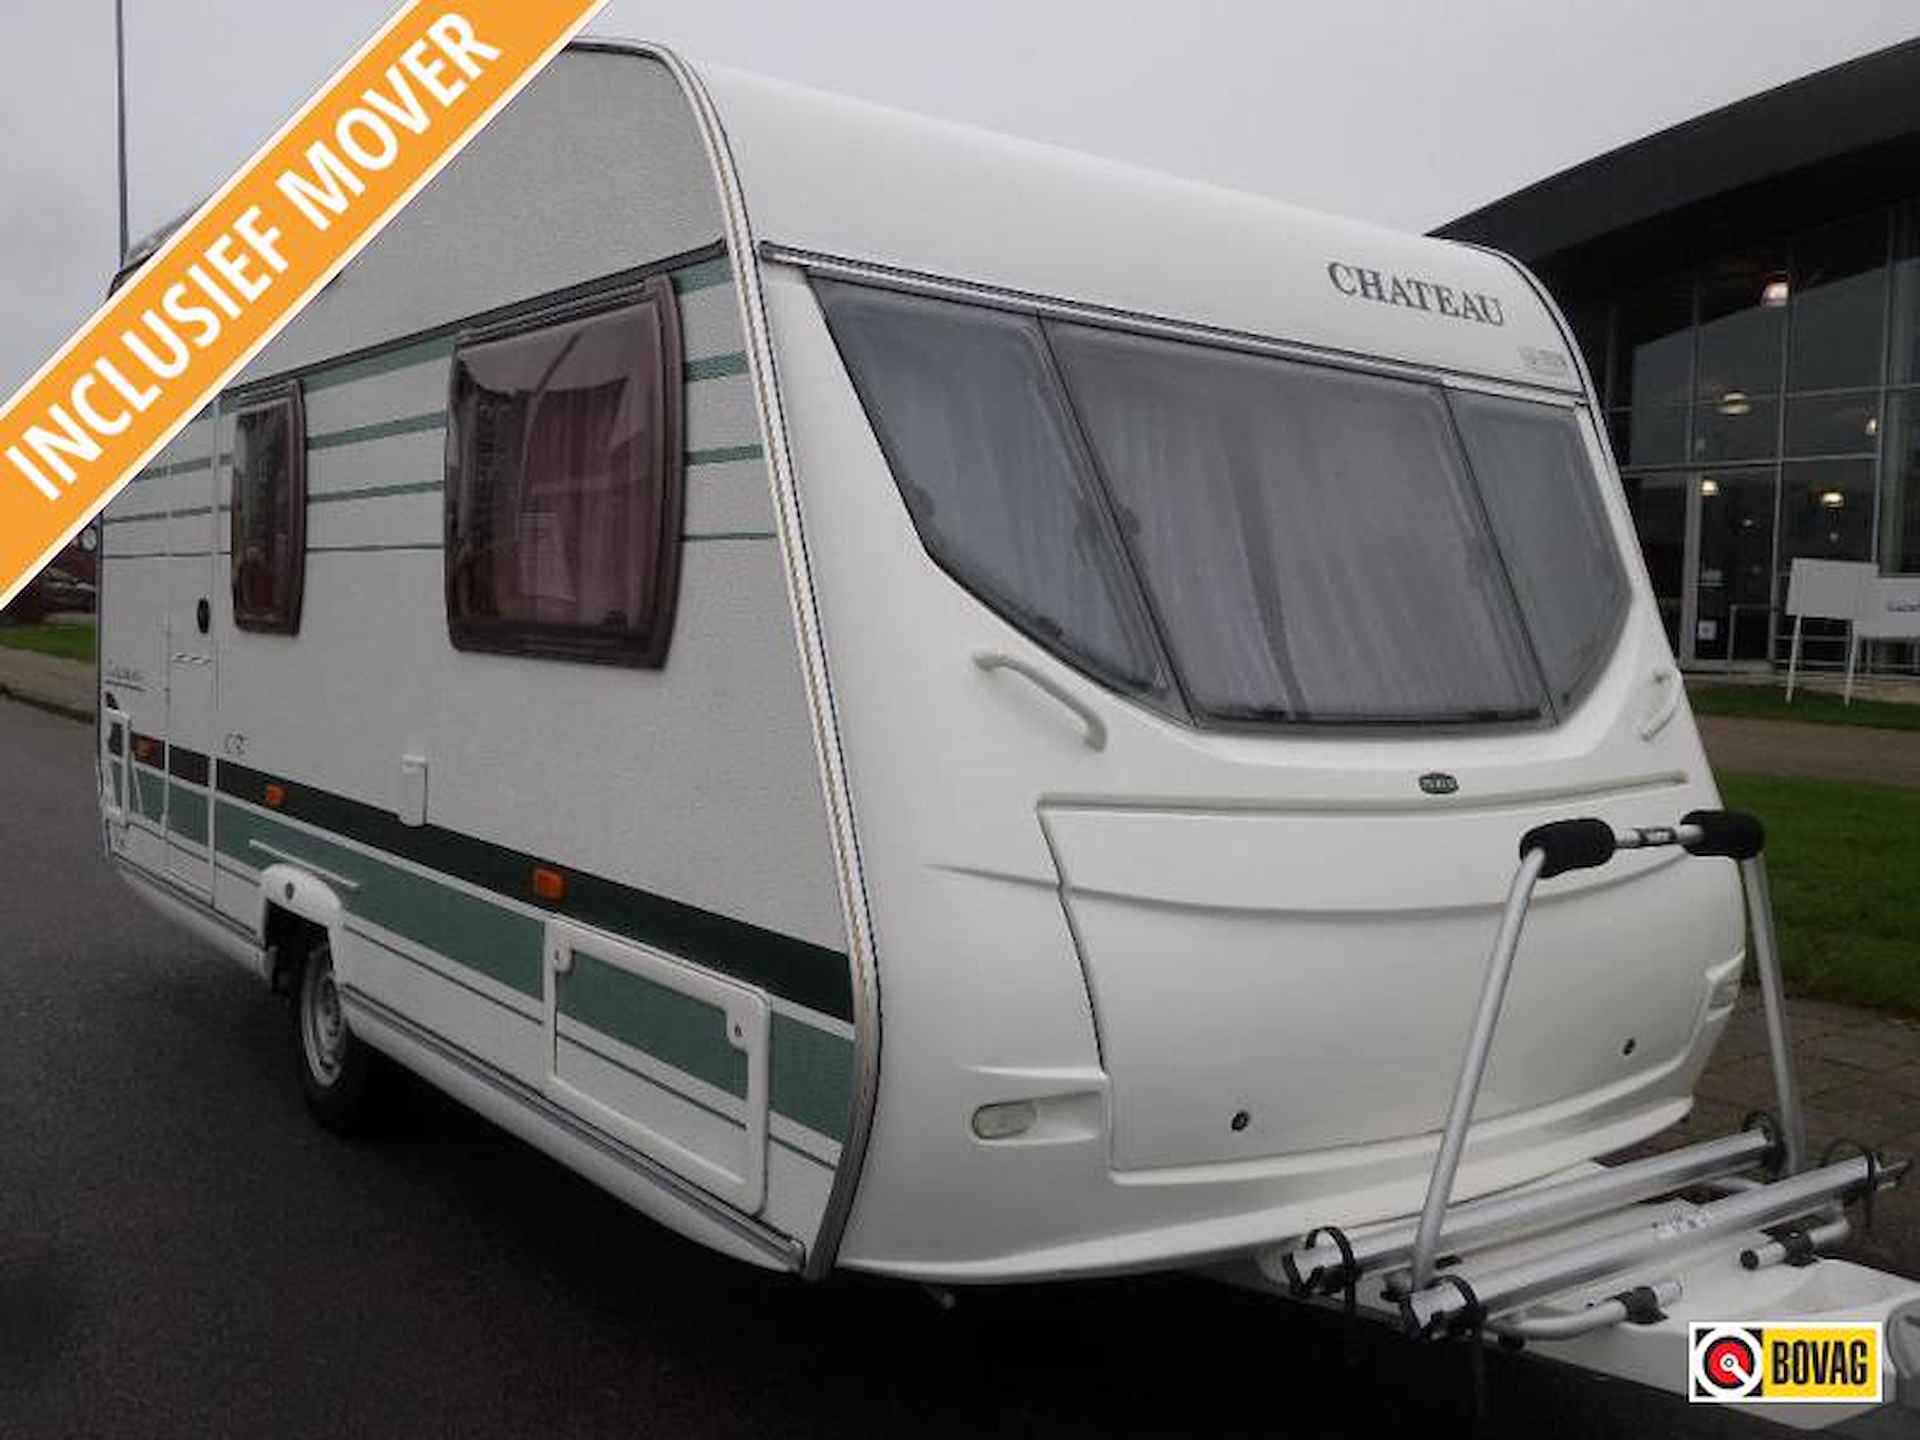 Chateau Calista CT 450 TMF Mover, tent, vast bed! - 1/22